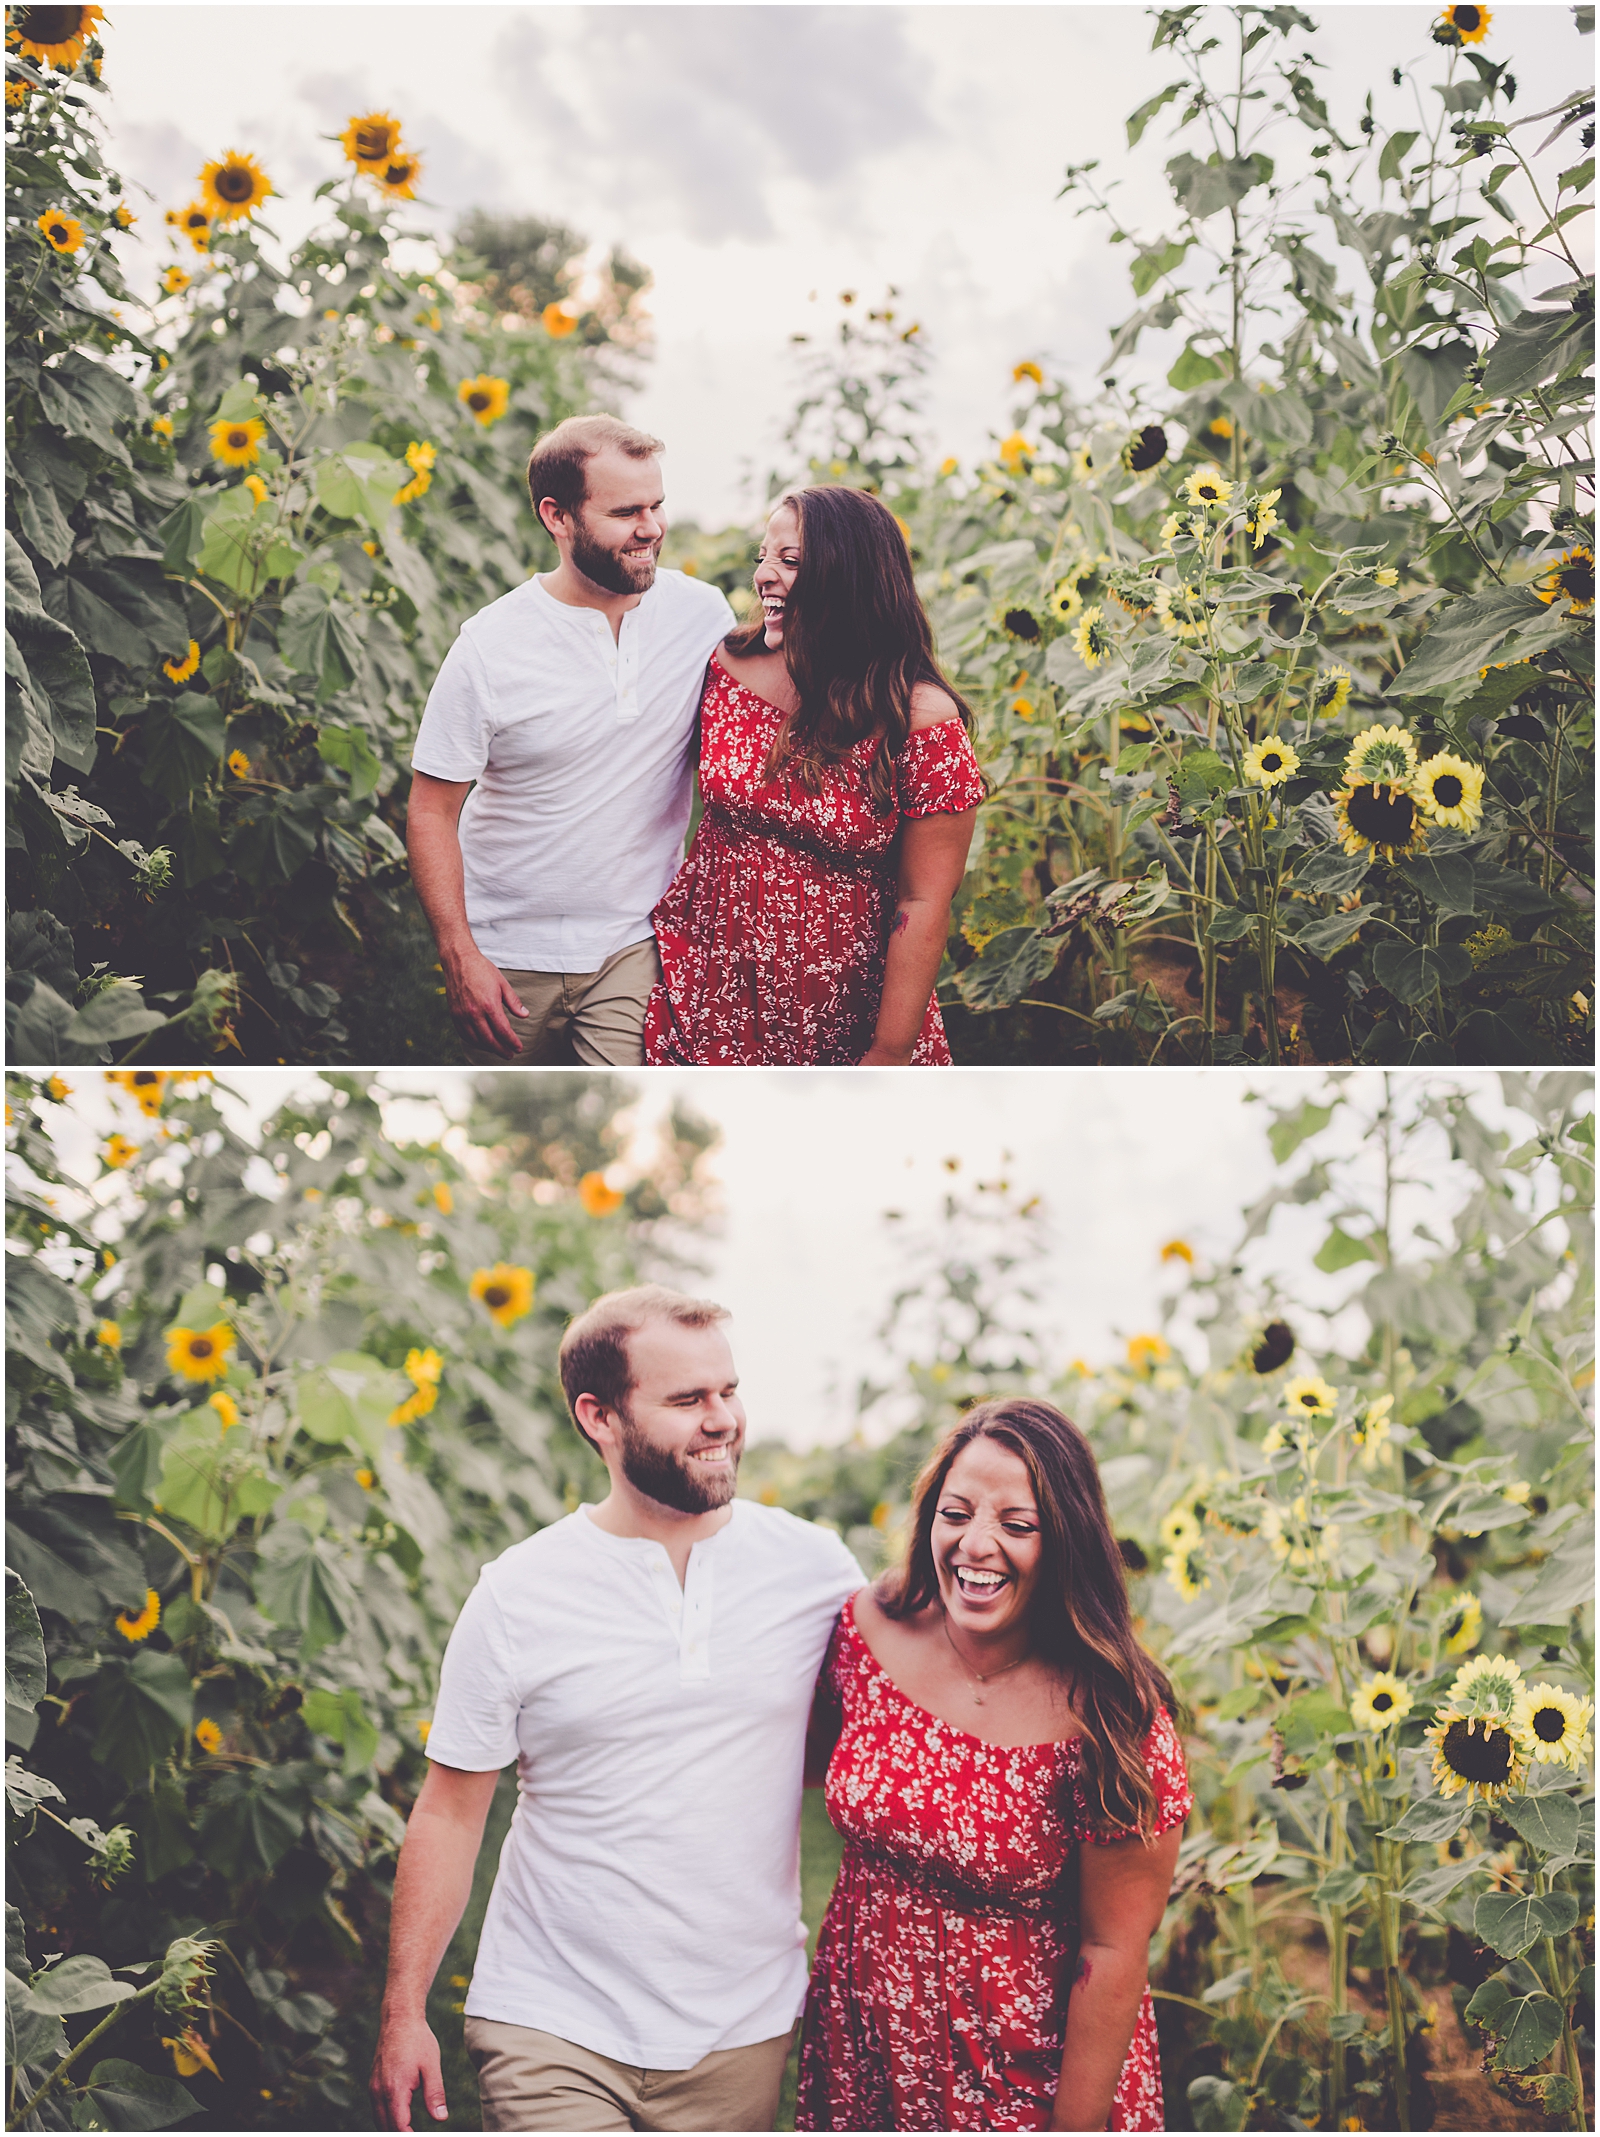 Daniela and Andrew's sunflower engagement photos at Proclamation Flowers with Chicagoland wedding photographer Kara Evans Photographer.